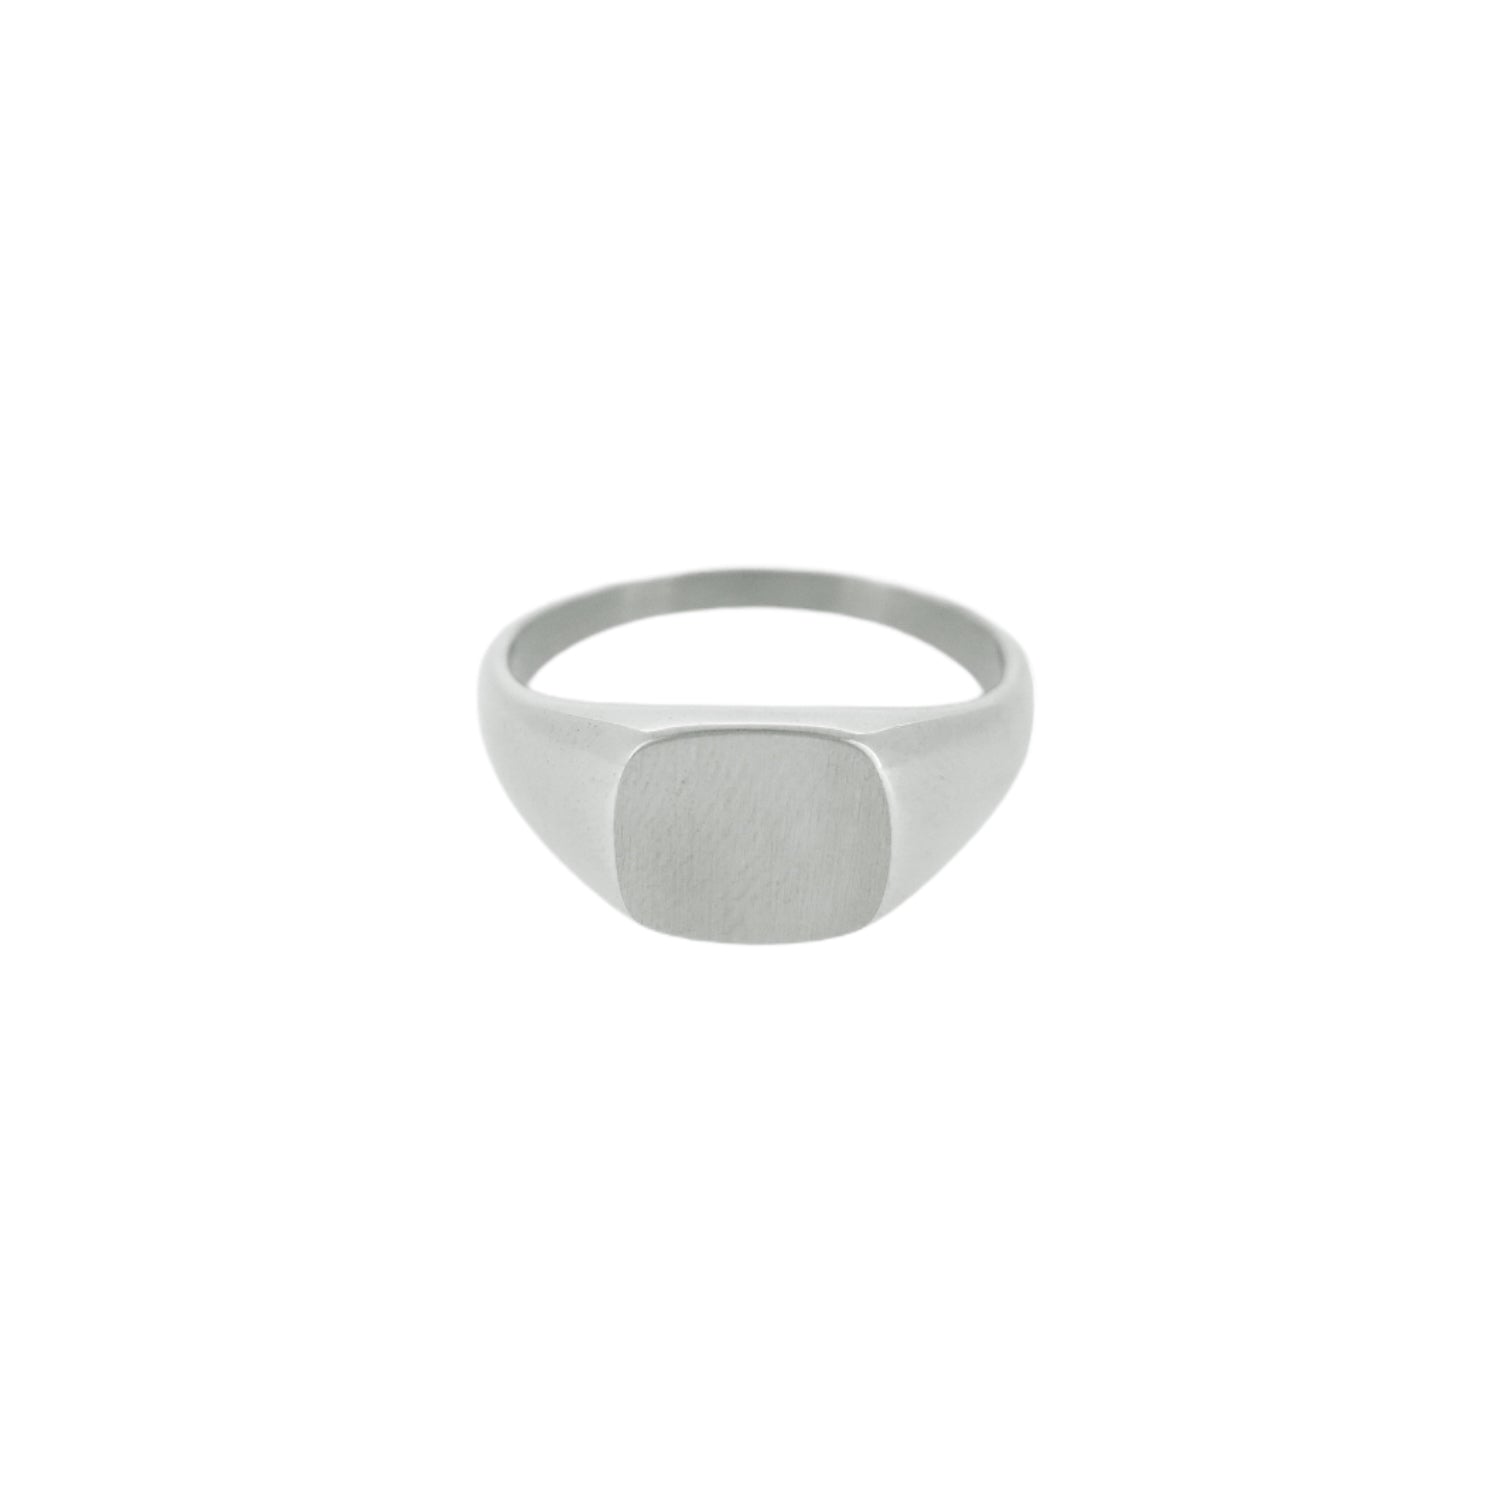 Silver mini signet ring with a brushed face